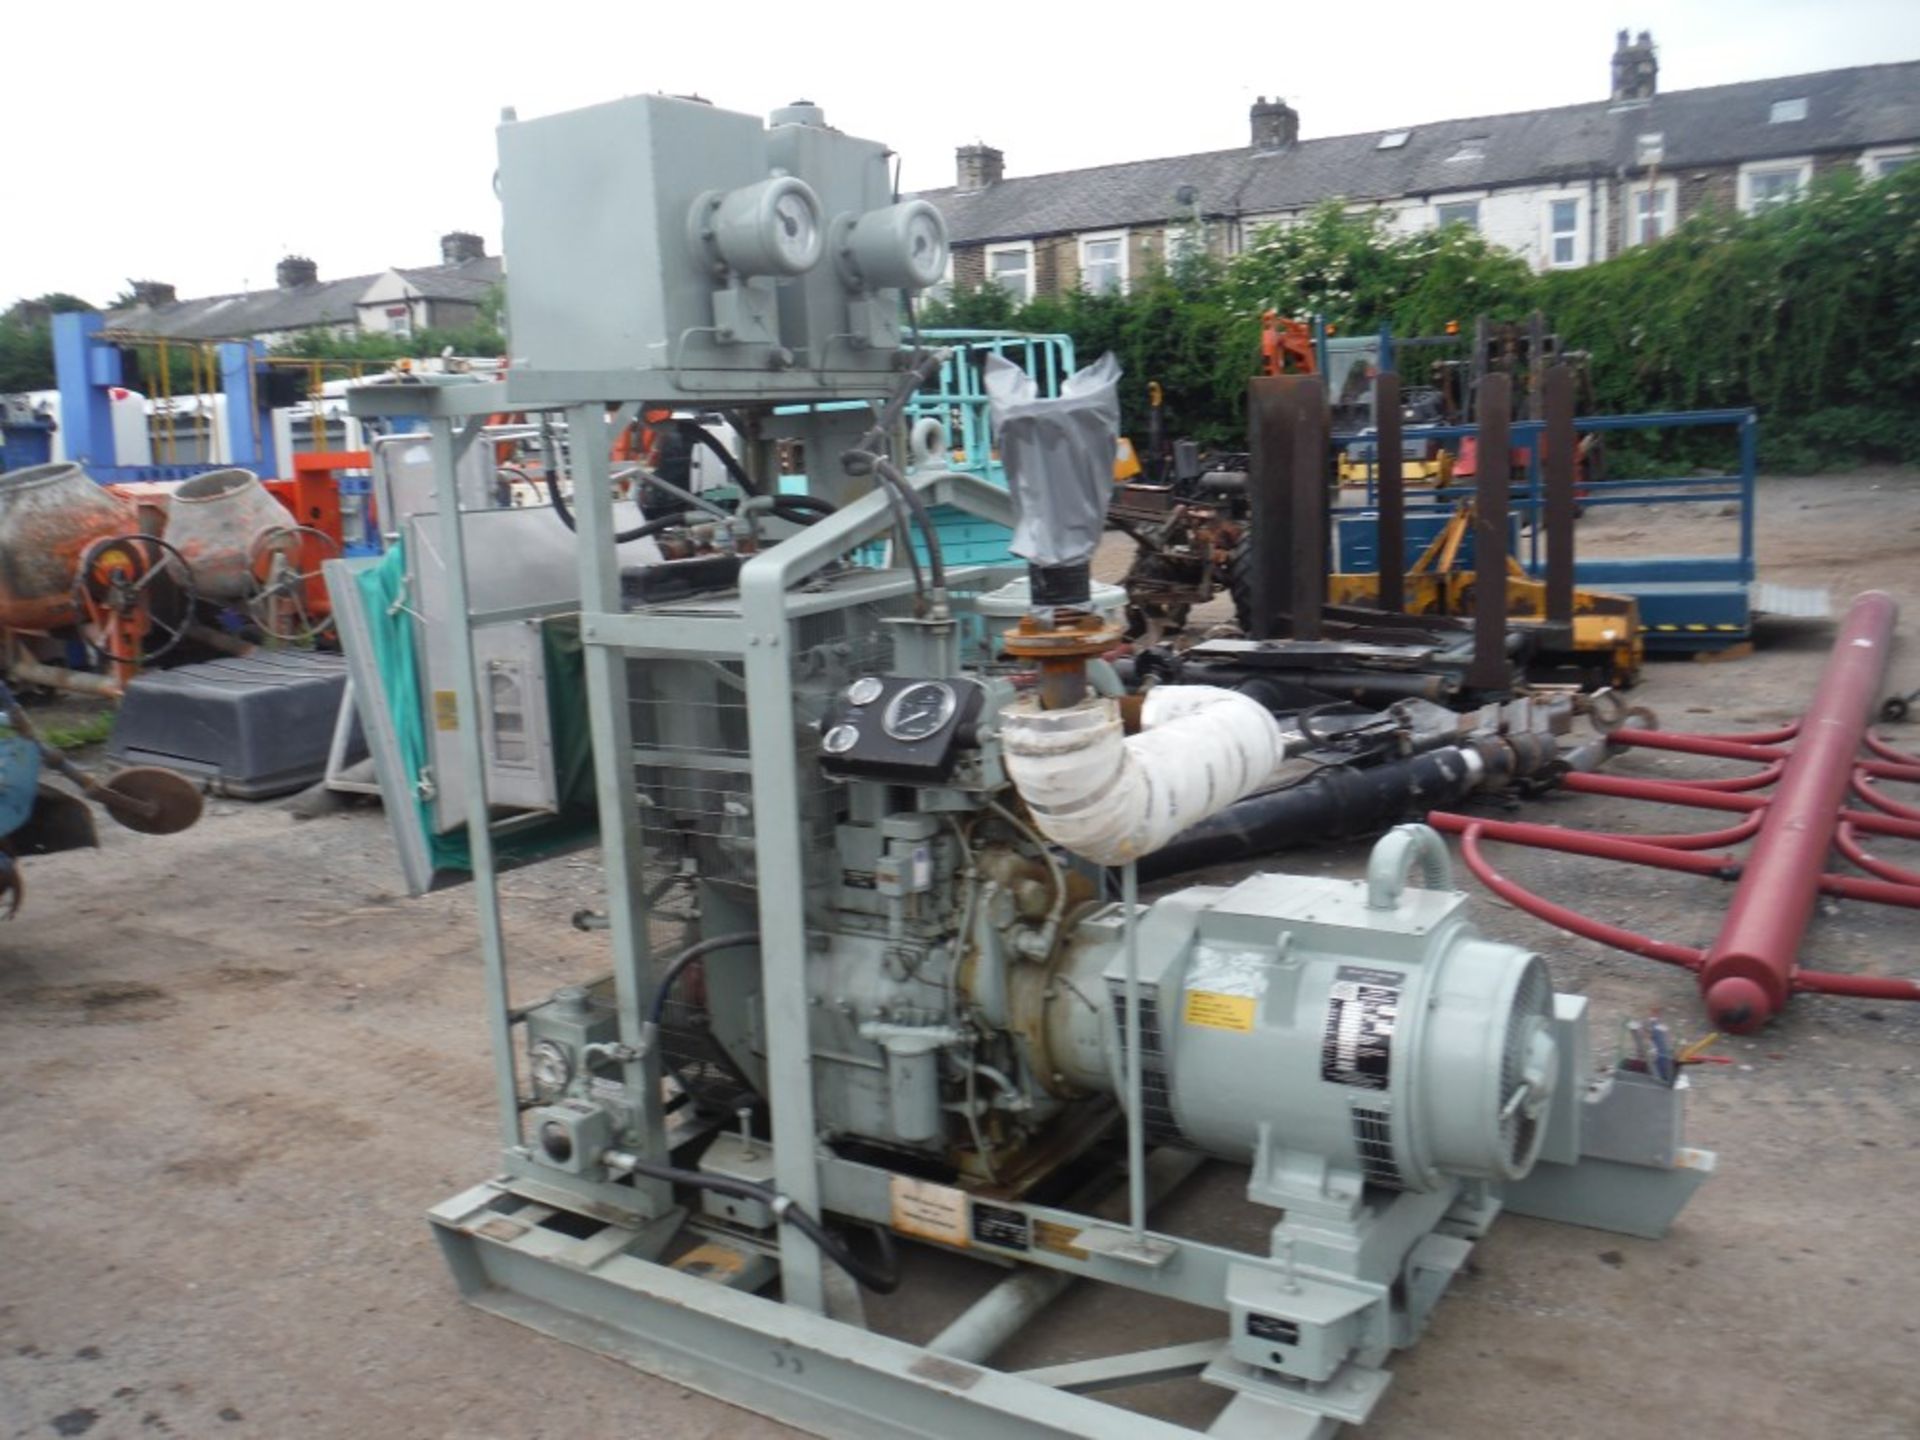 ENGLISH ELECTRIC 3CYL LISTER ENGINE 18.5 KVA GENERATOR, 1037 HOURS STANDBY [+ VAT]